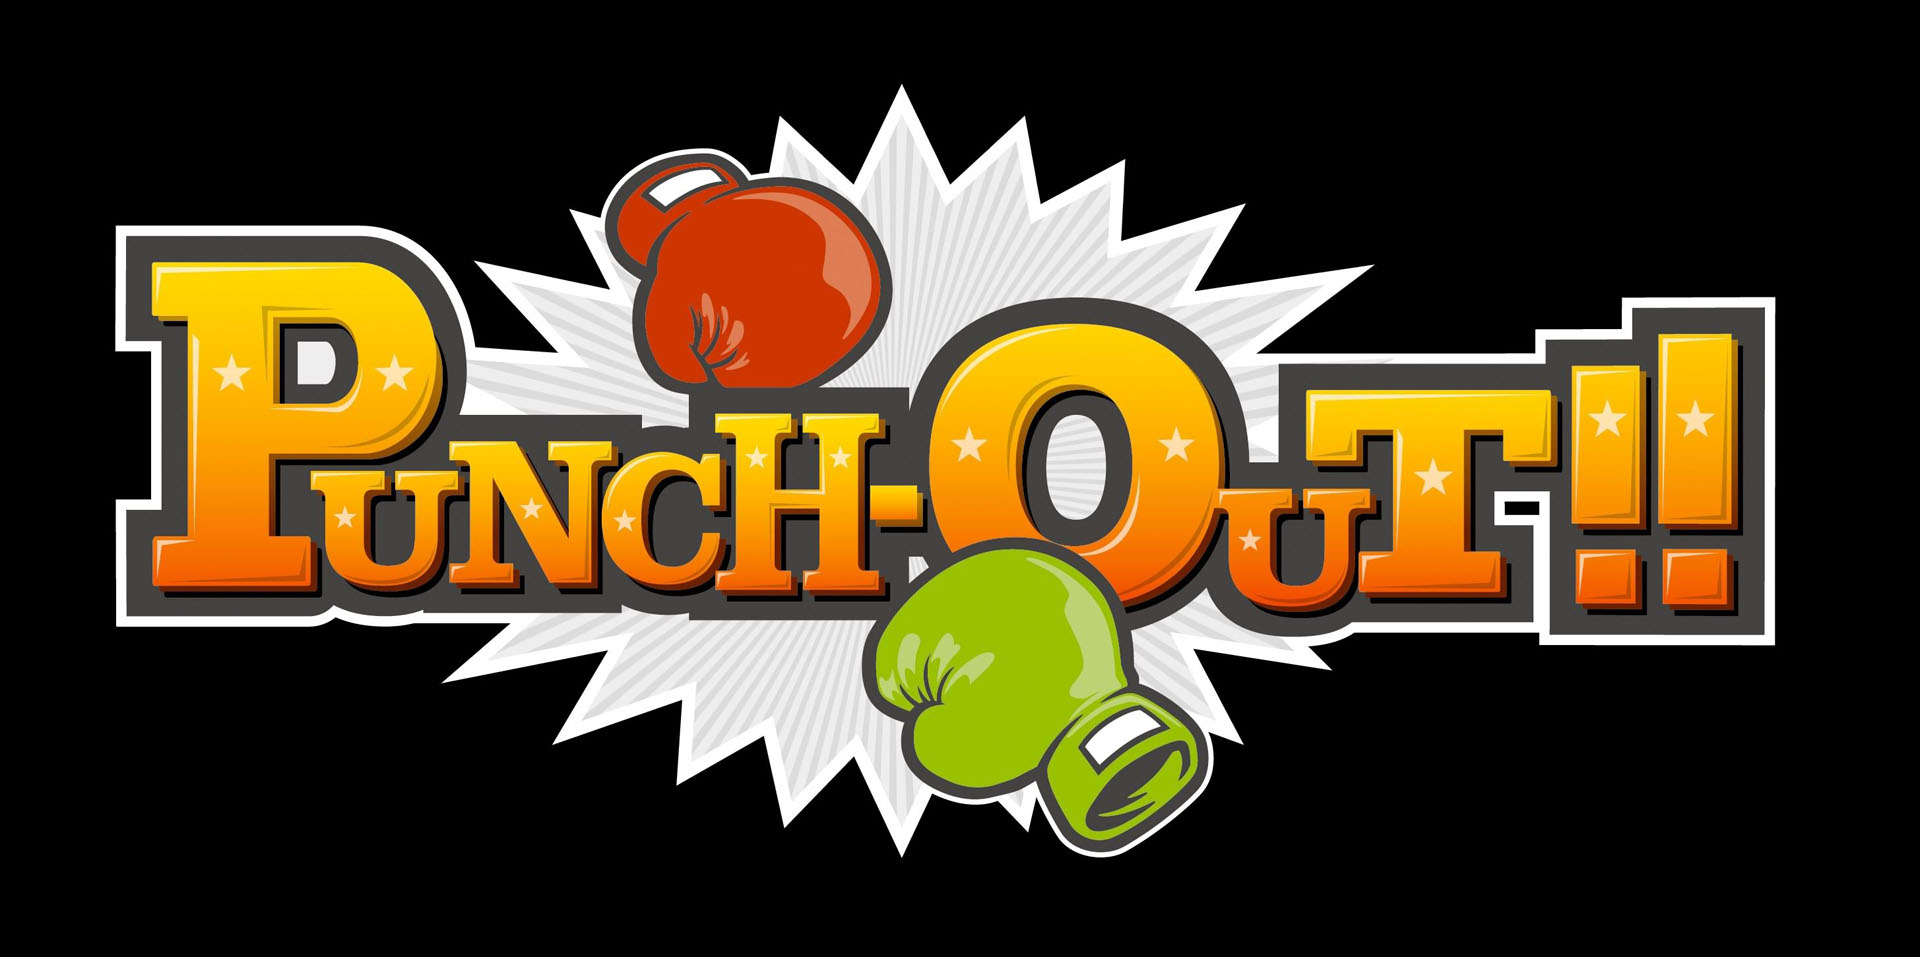 Logo - Nintendo Games Wallpaper Image featuring Punch Out